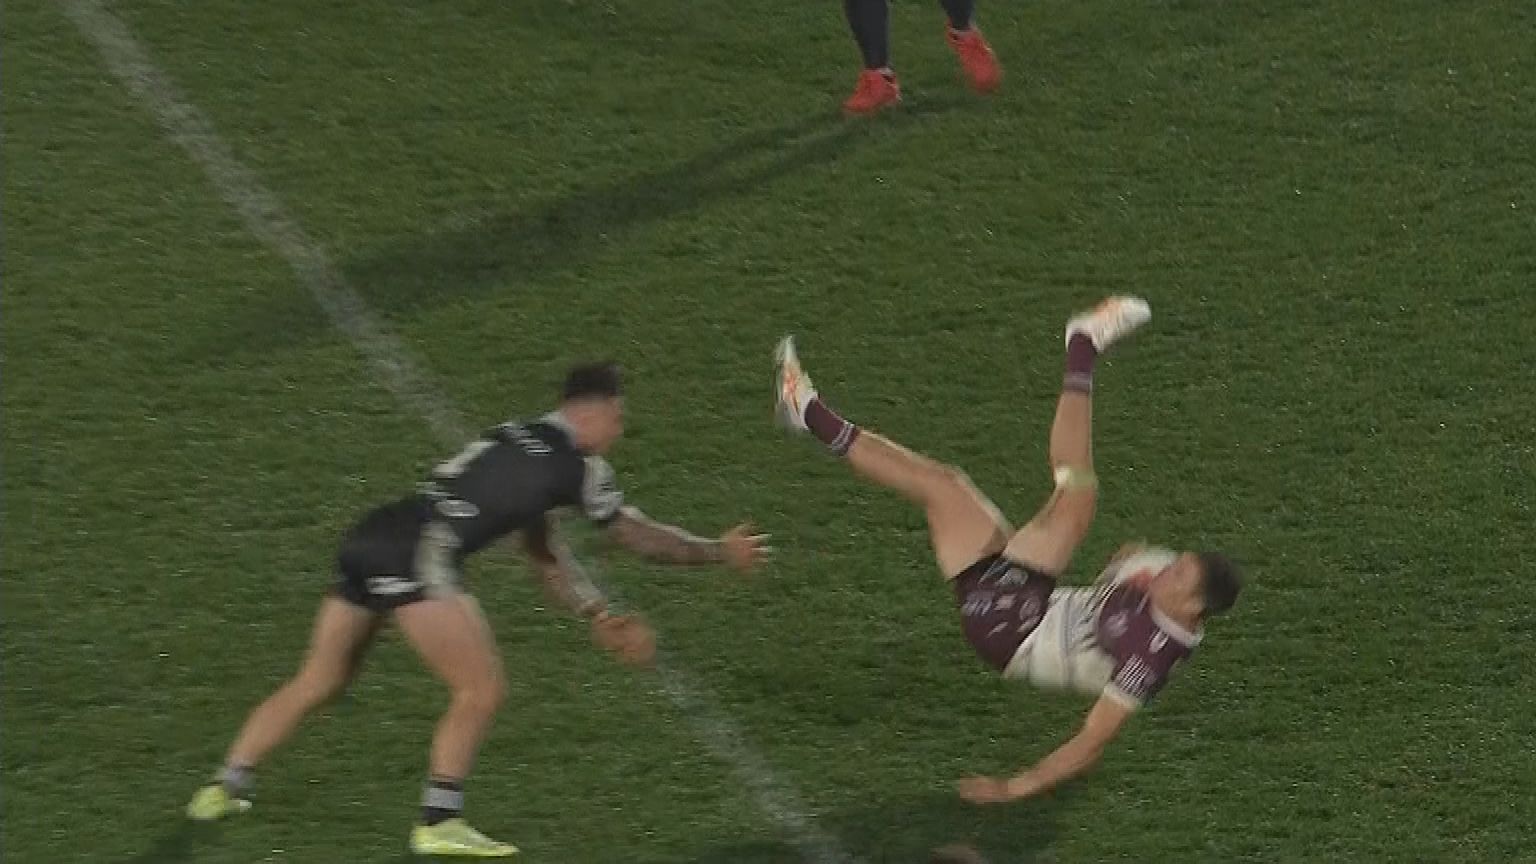 'Cruel' end to Manly Sea Eagles' season after 'pretentious rule﻿' costs them near victory over Warriors